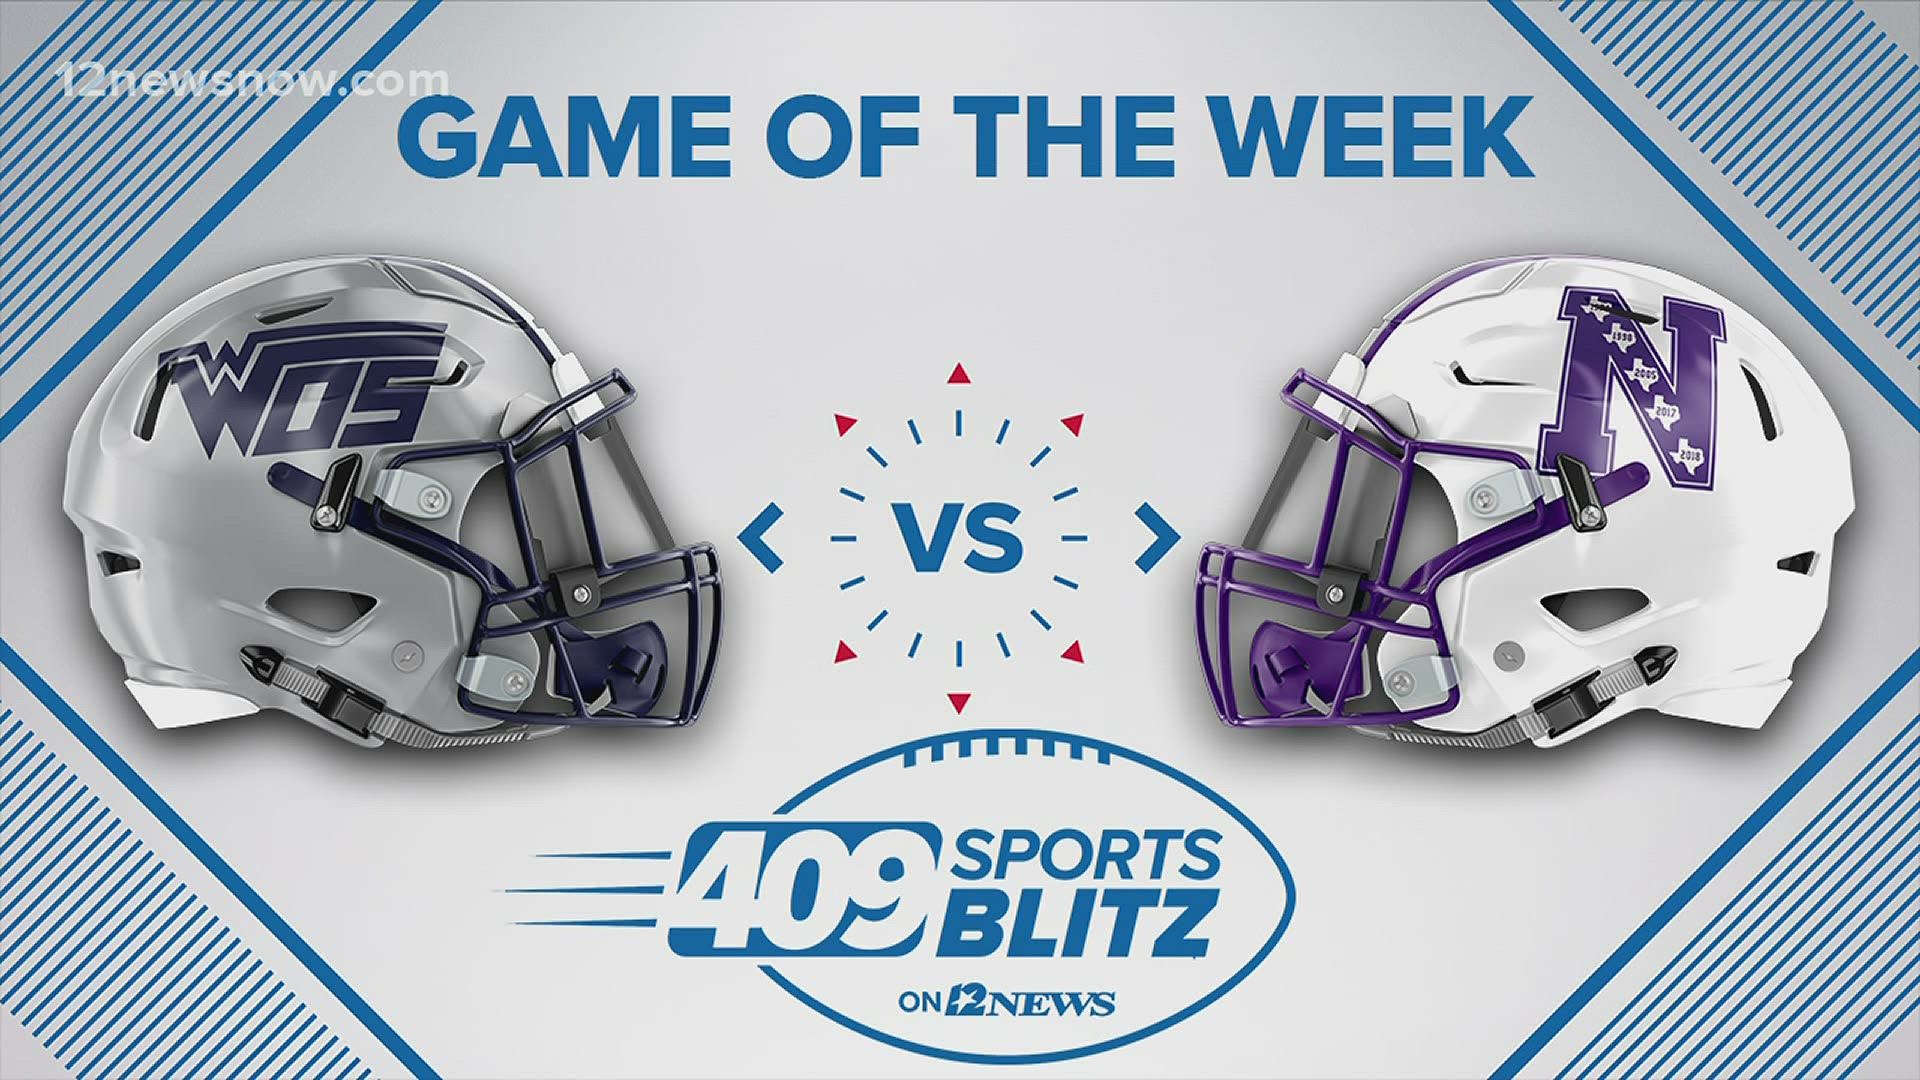 Blood bloods to meet in 409Sports Blitz Game of The Week